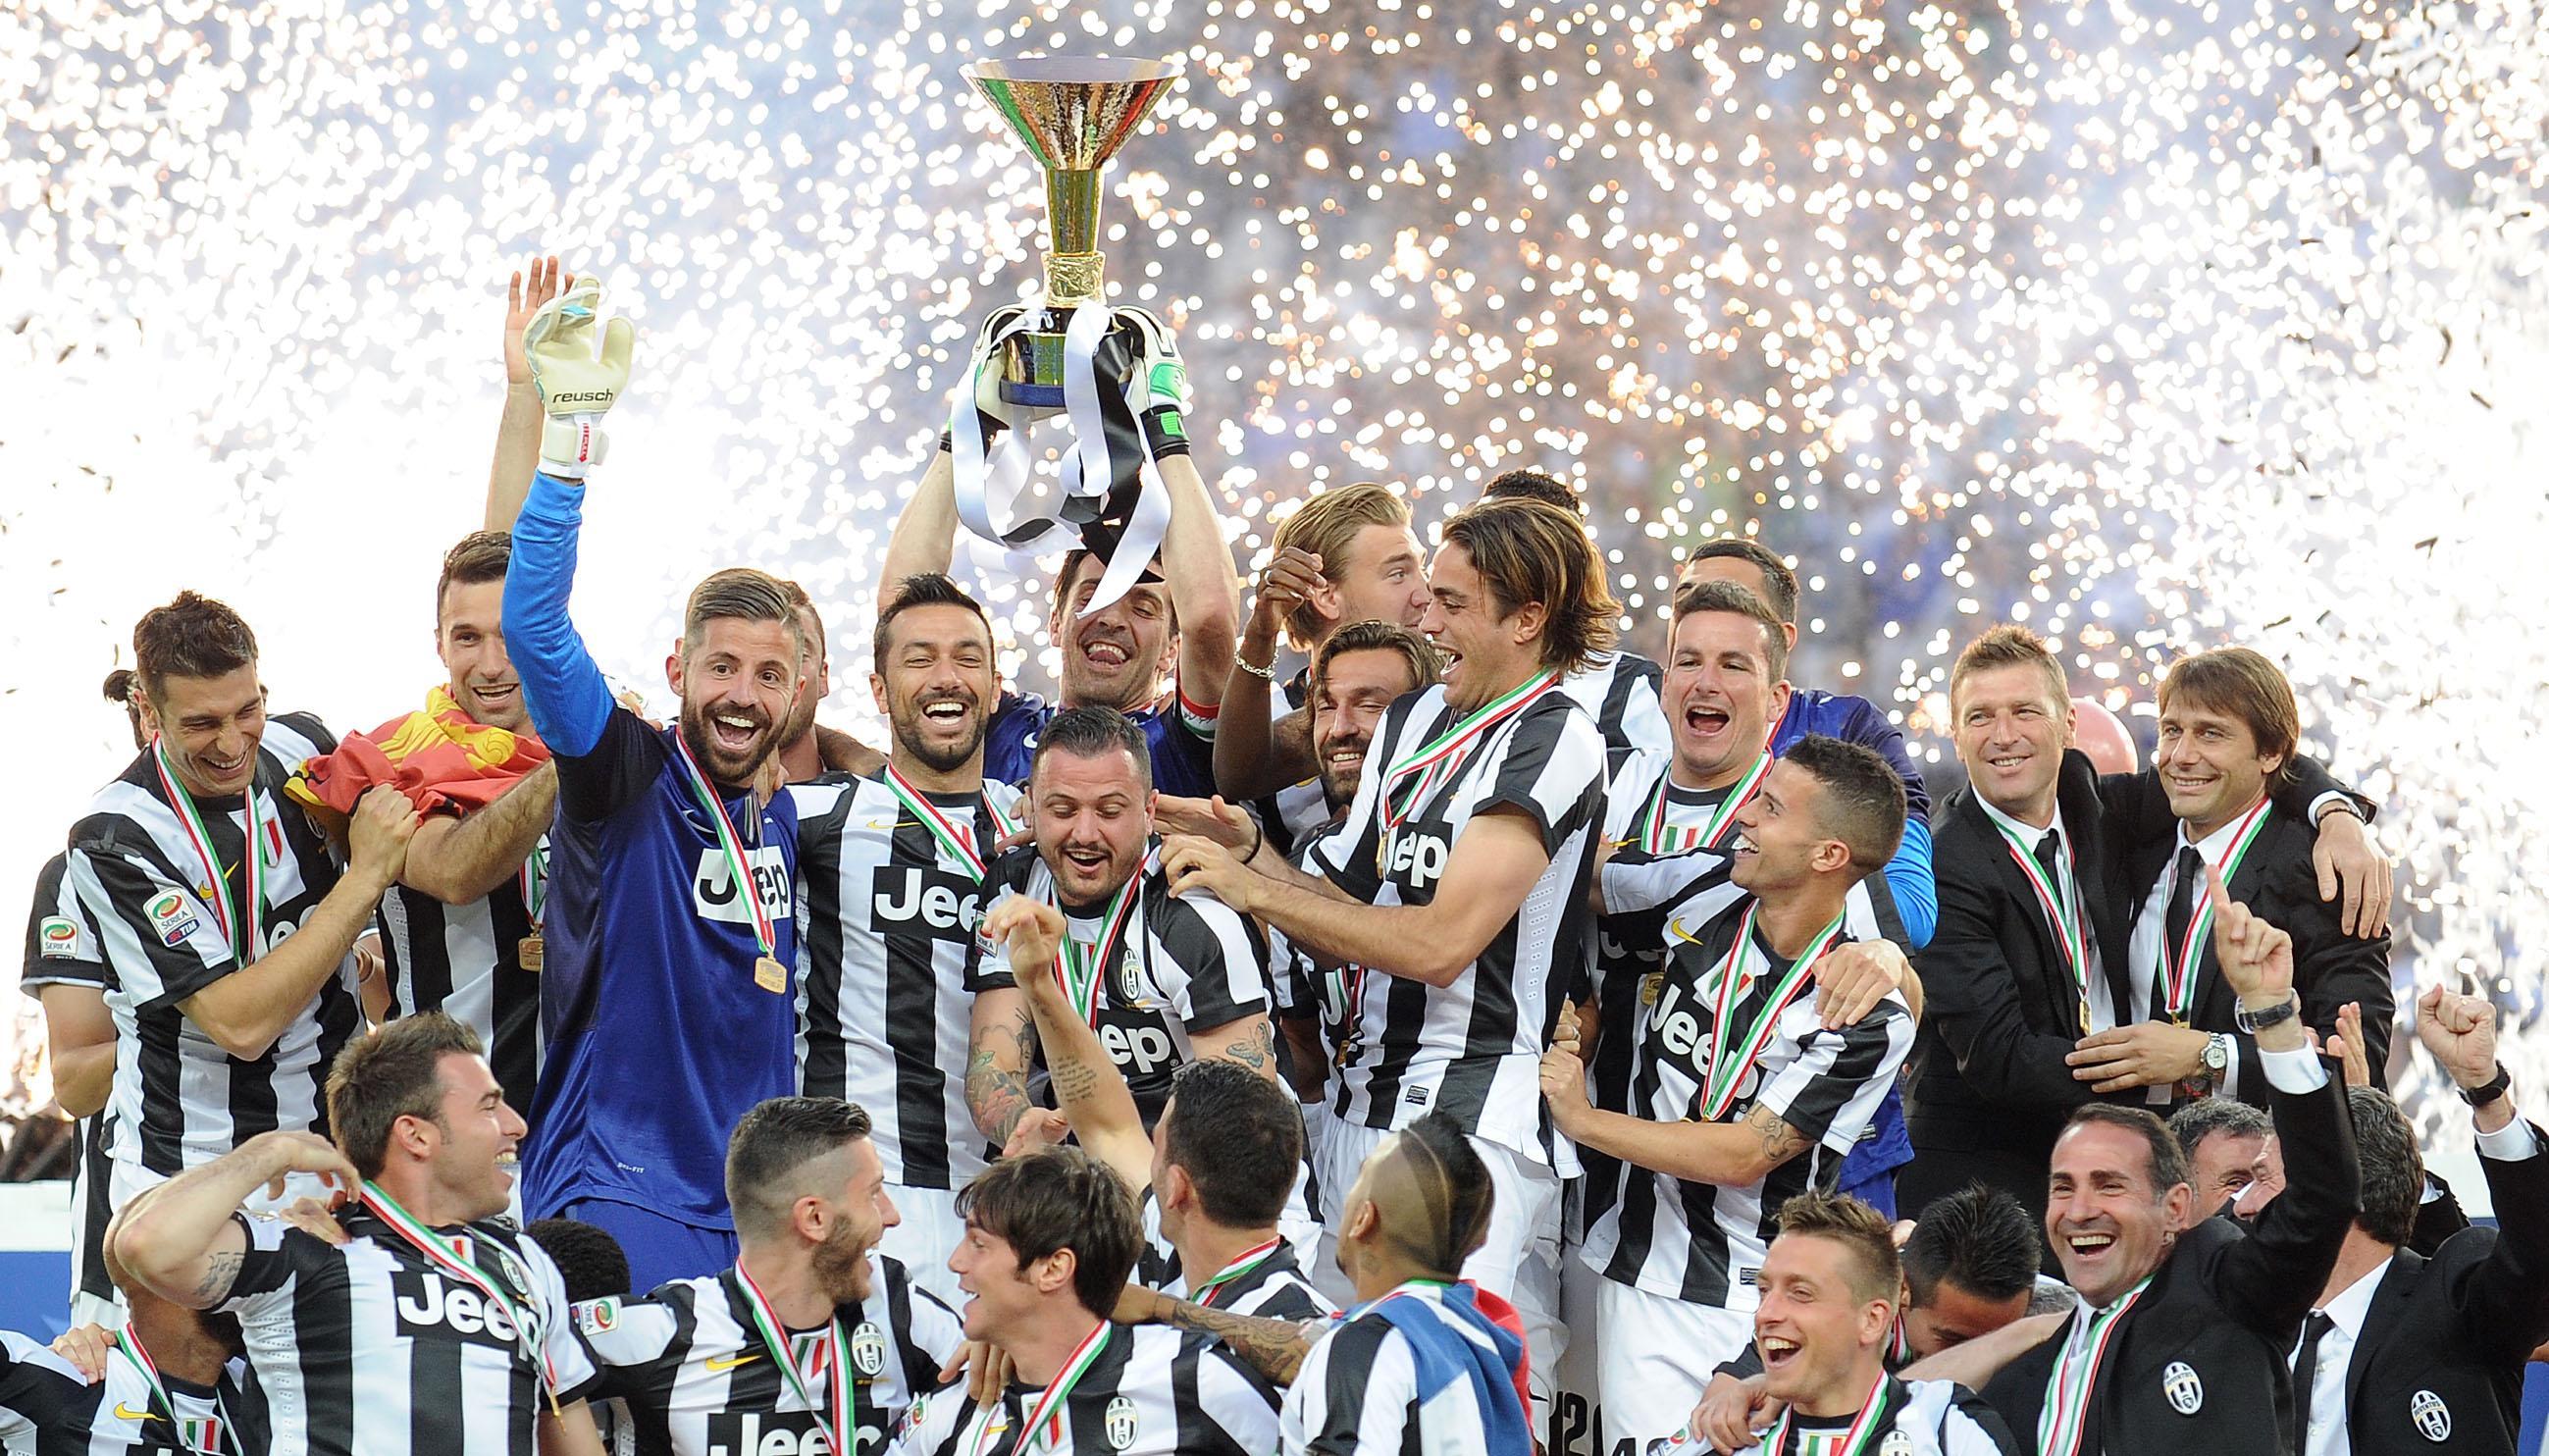 A not-so serious, way-too long review of Calcio in 2012-13